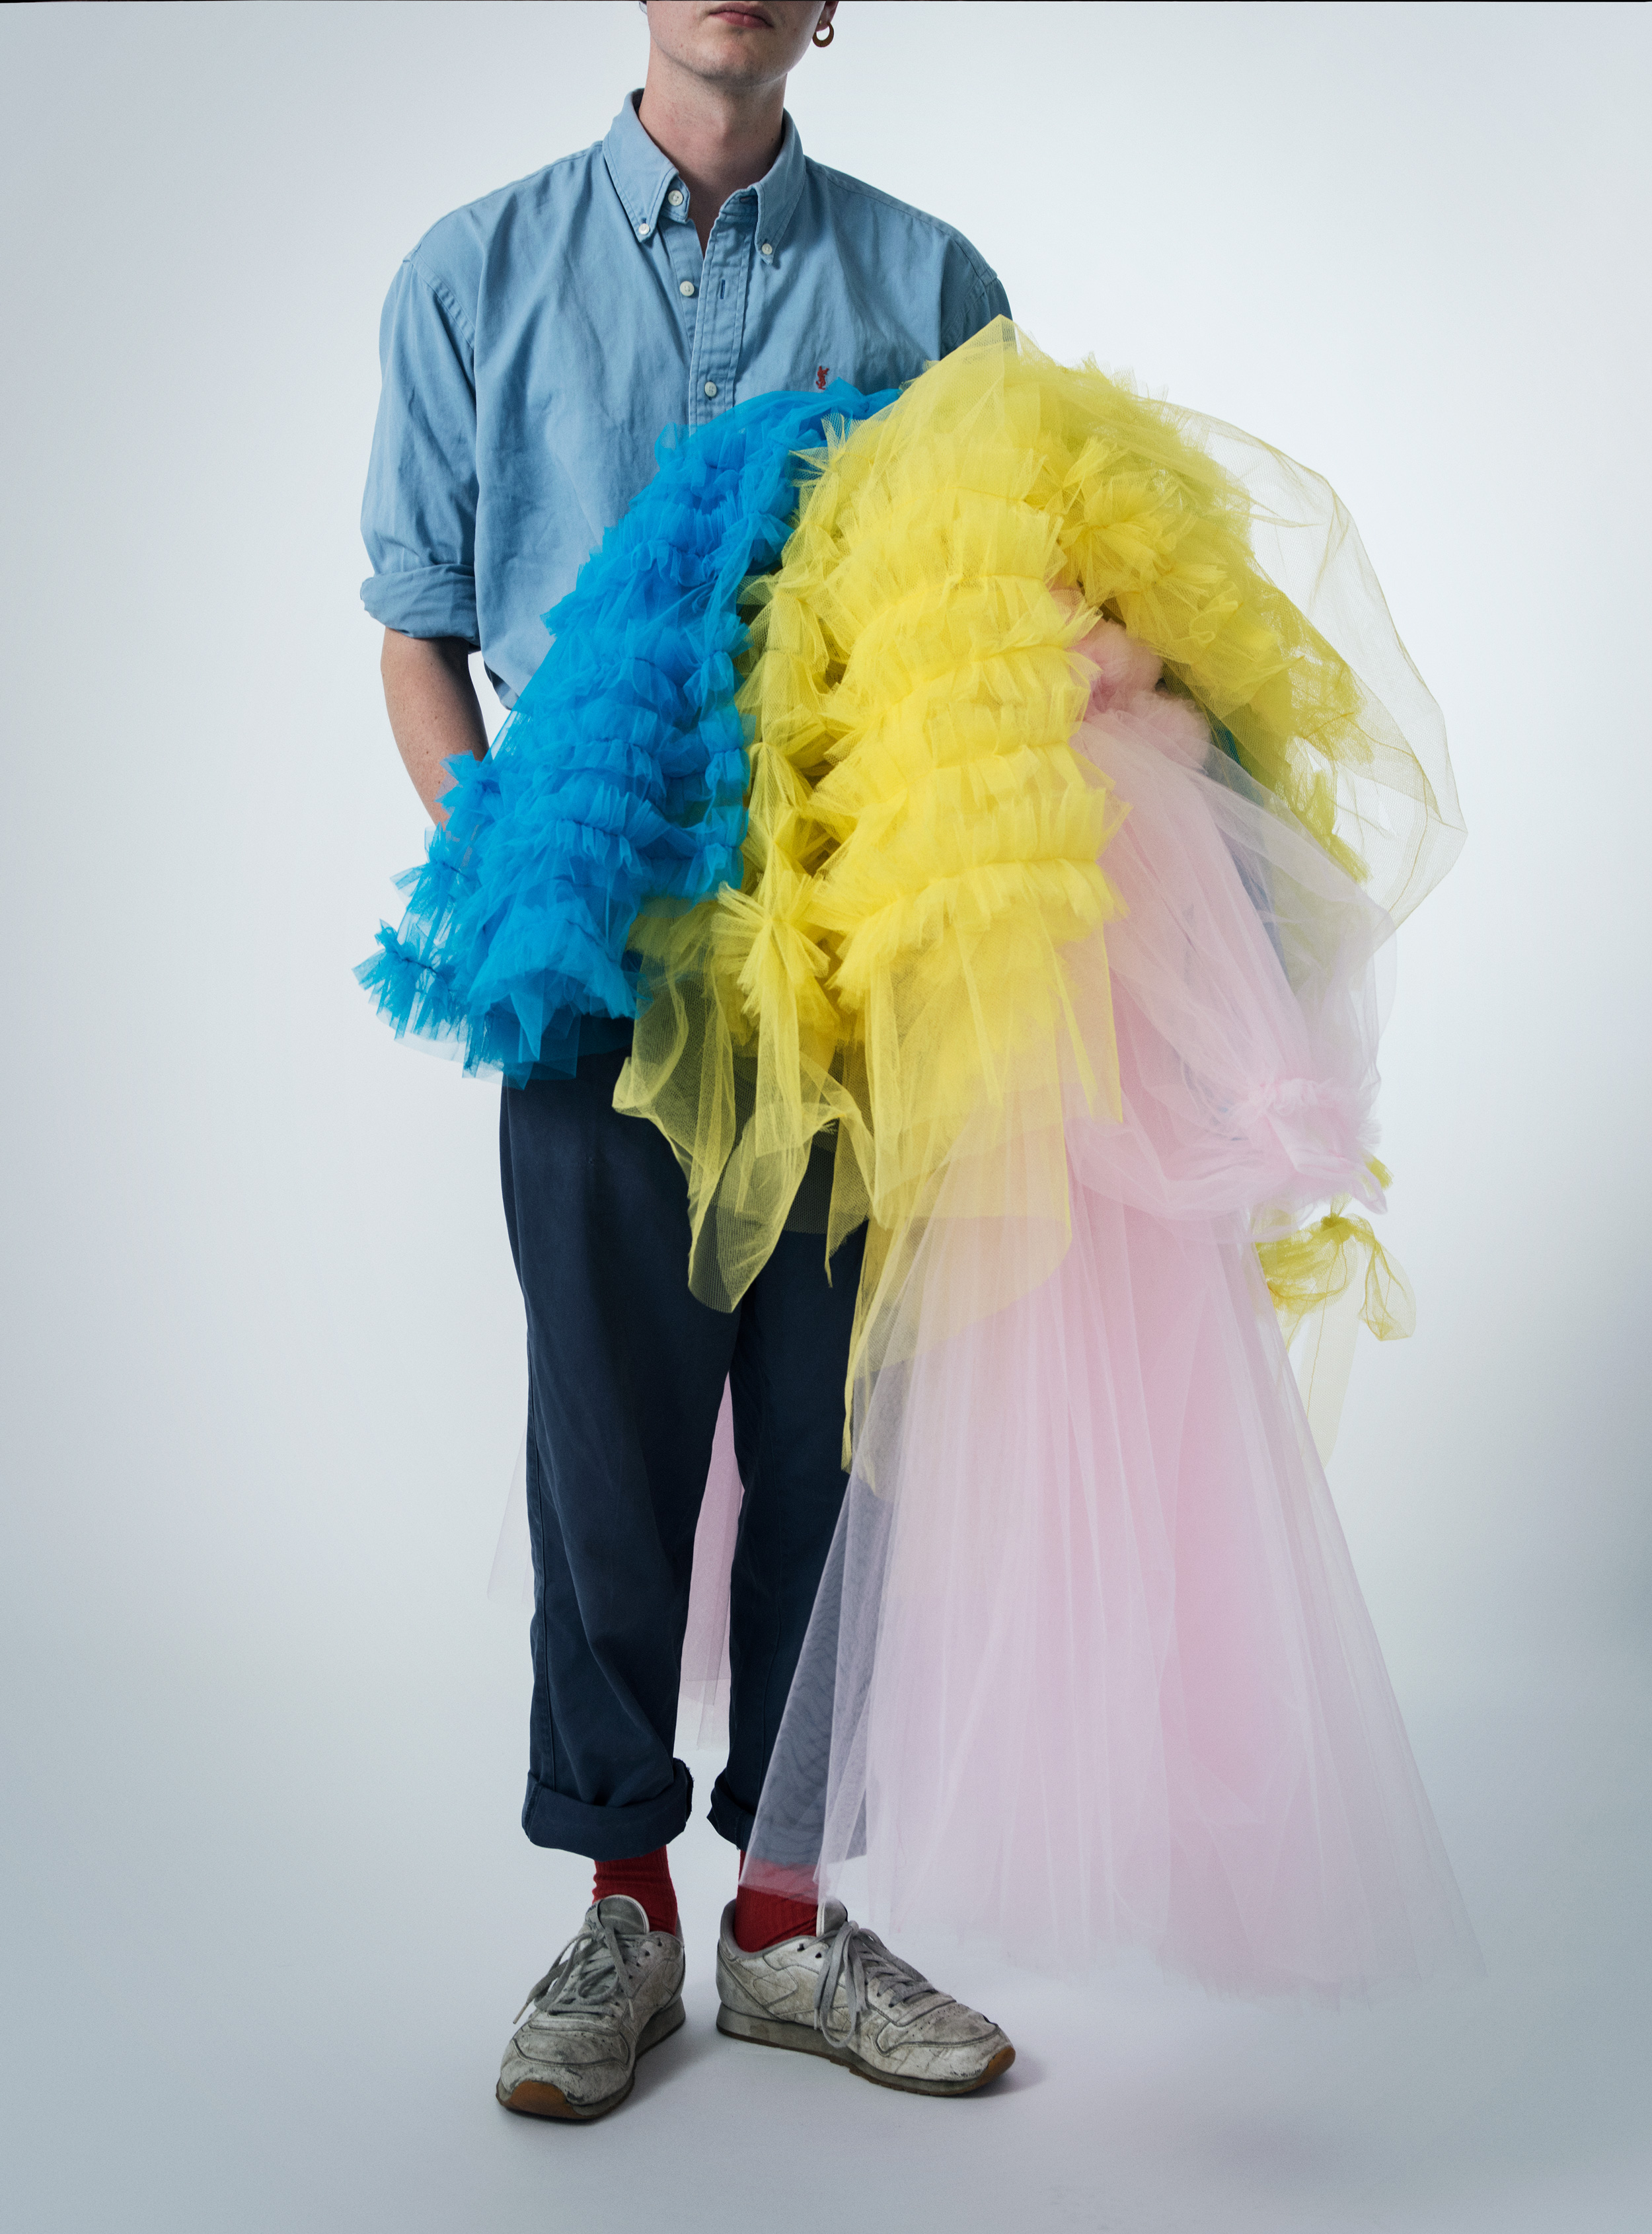 Celebrate The Faces Frills And Fun Of Molly Goddard S Technicolor Tulle Filled World I D